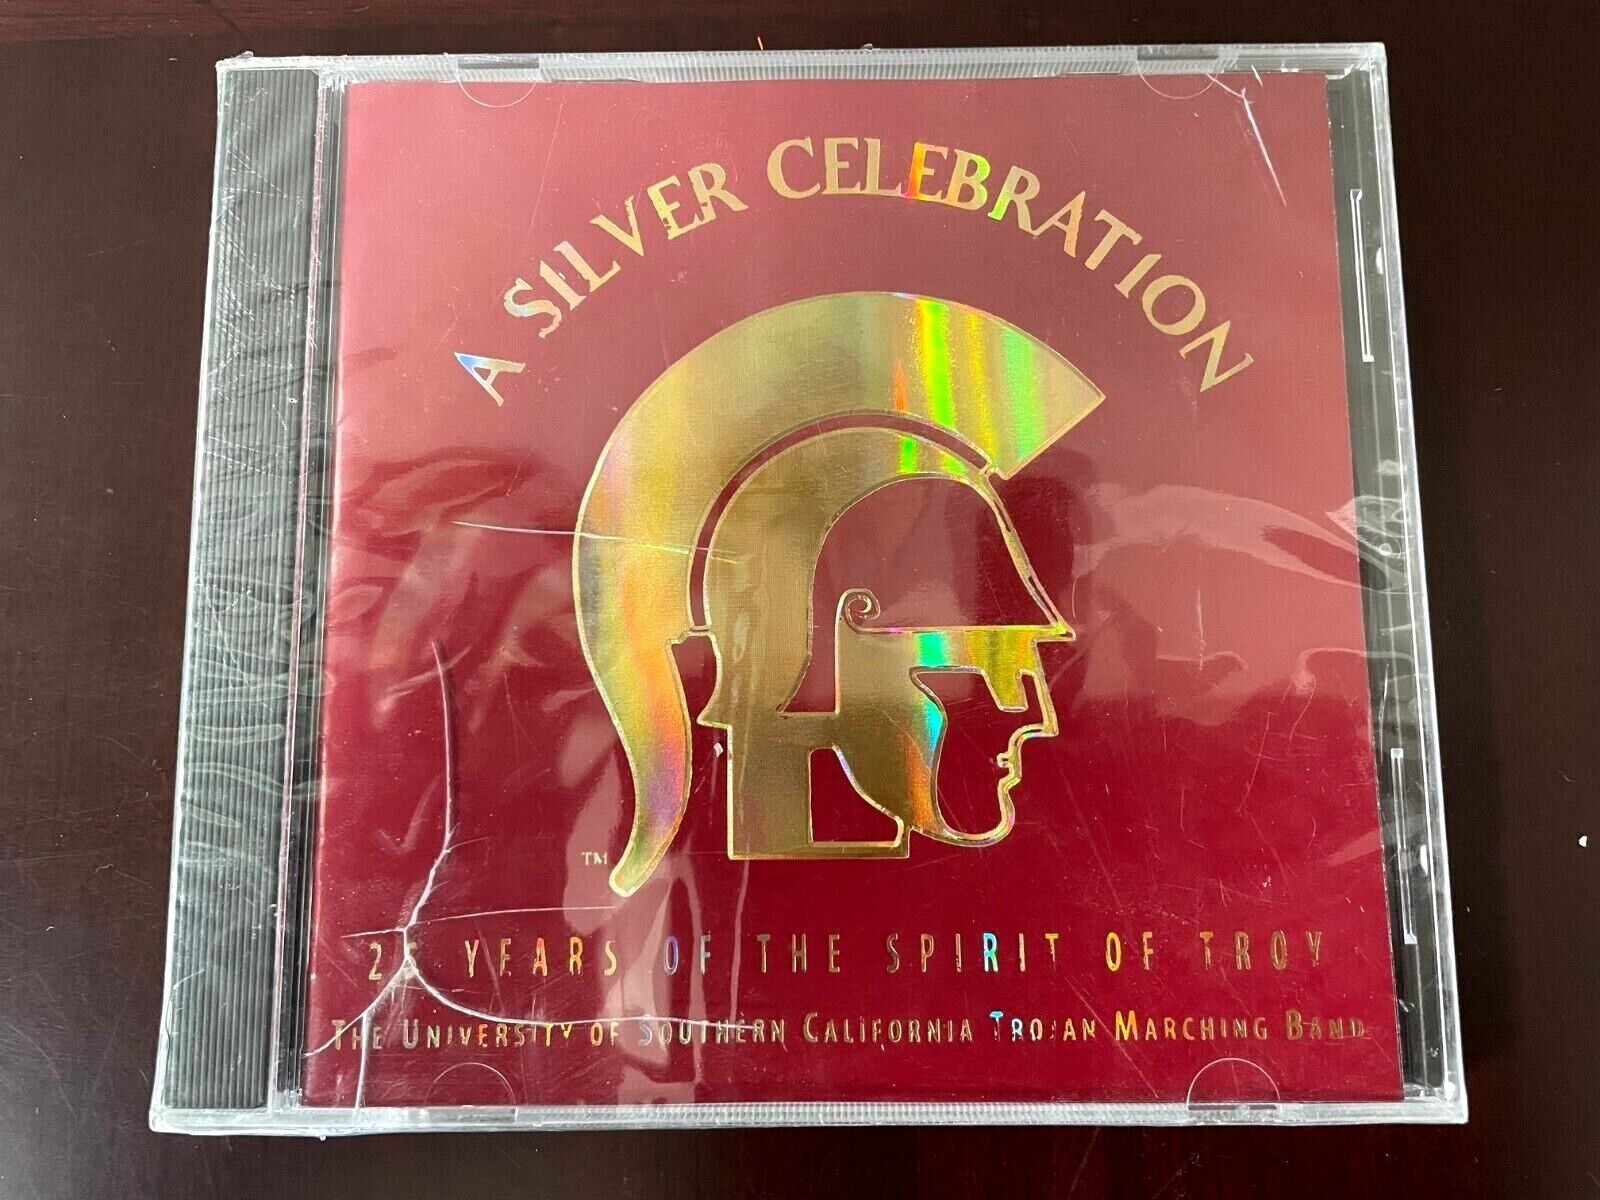 A Silver Celebration-25 Yrs of Spirit of Troy USC, CD New (SEE NOTE)